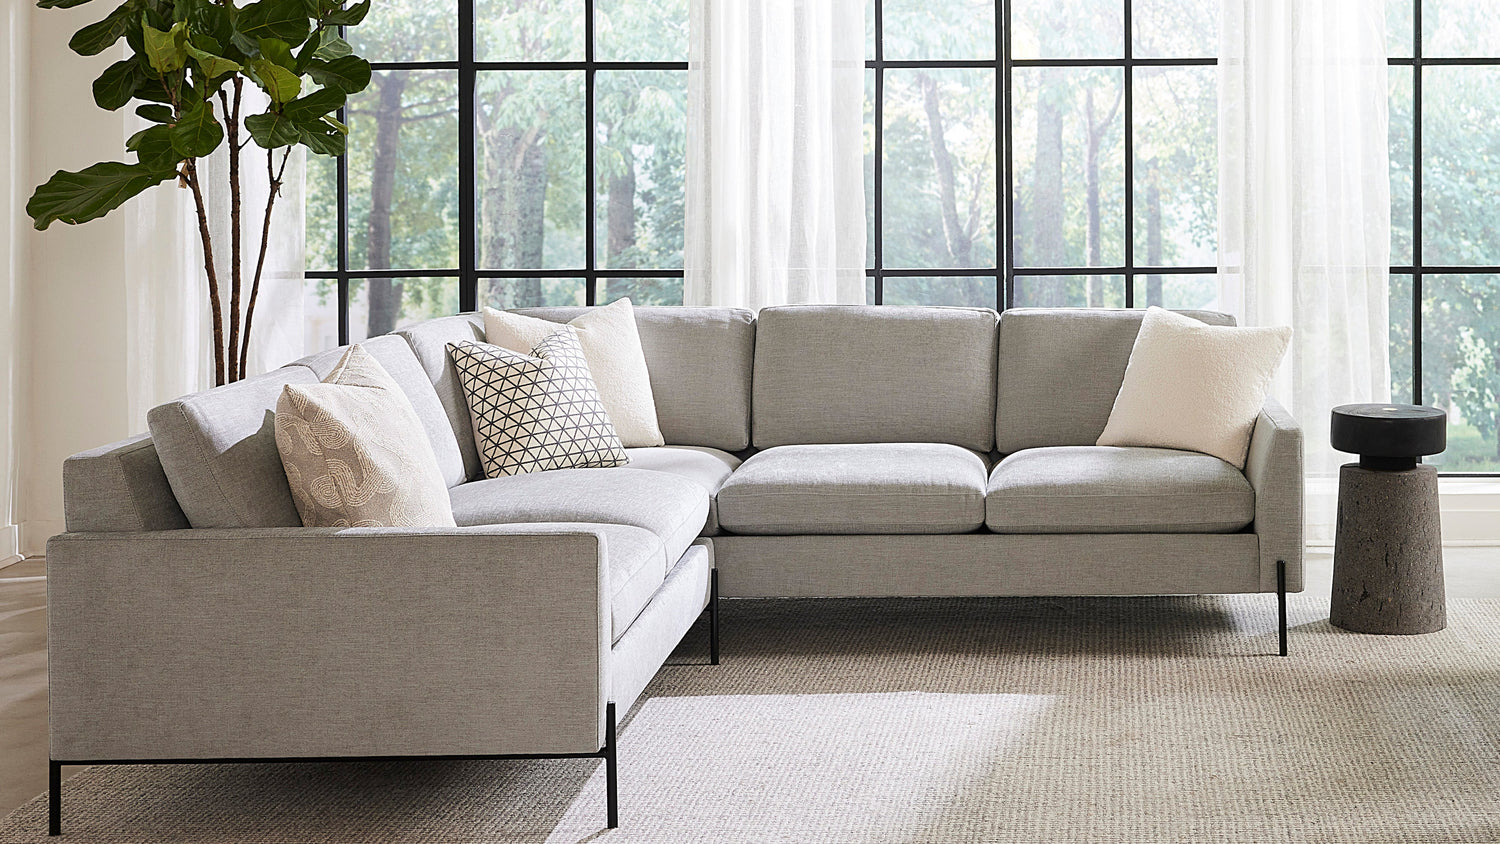 A modern living room with a large gray sectional sofa adorned with white and patterned throw pillows. The room features large windows with sheer white curtains, revealing a green outdoor scene. A tall potted plant stands in the corner next to the sofa.